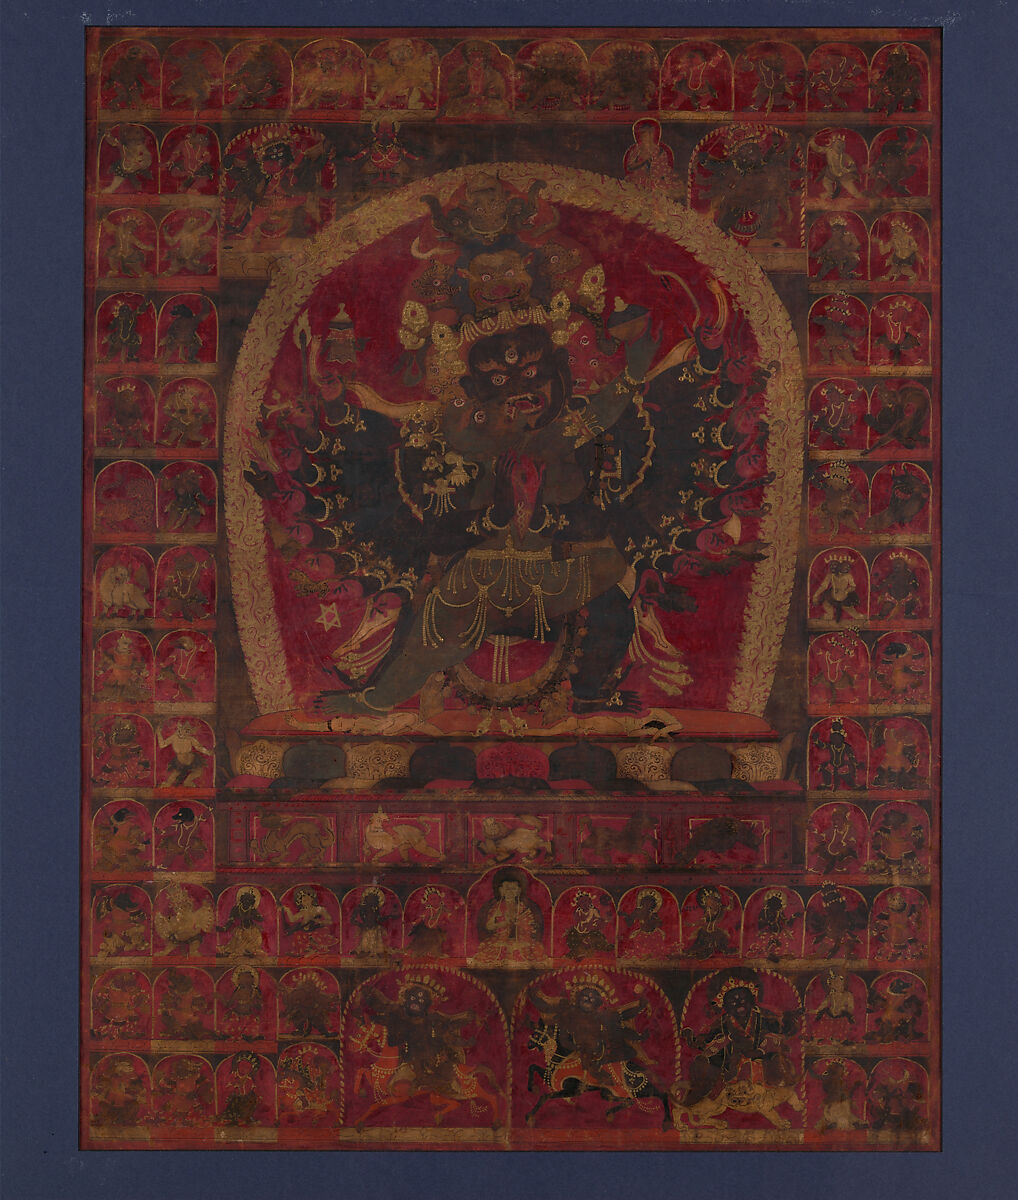 The Wrathful Bon Deity Walse Ngampa, One of the Five Fortress Meditational Deities, Ink, gold and opaque watercolor on cloth, Tibet 